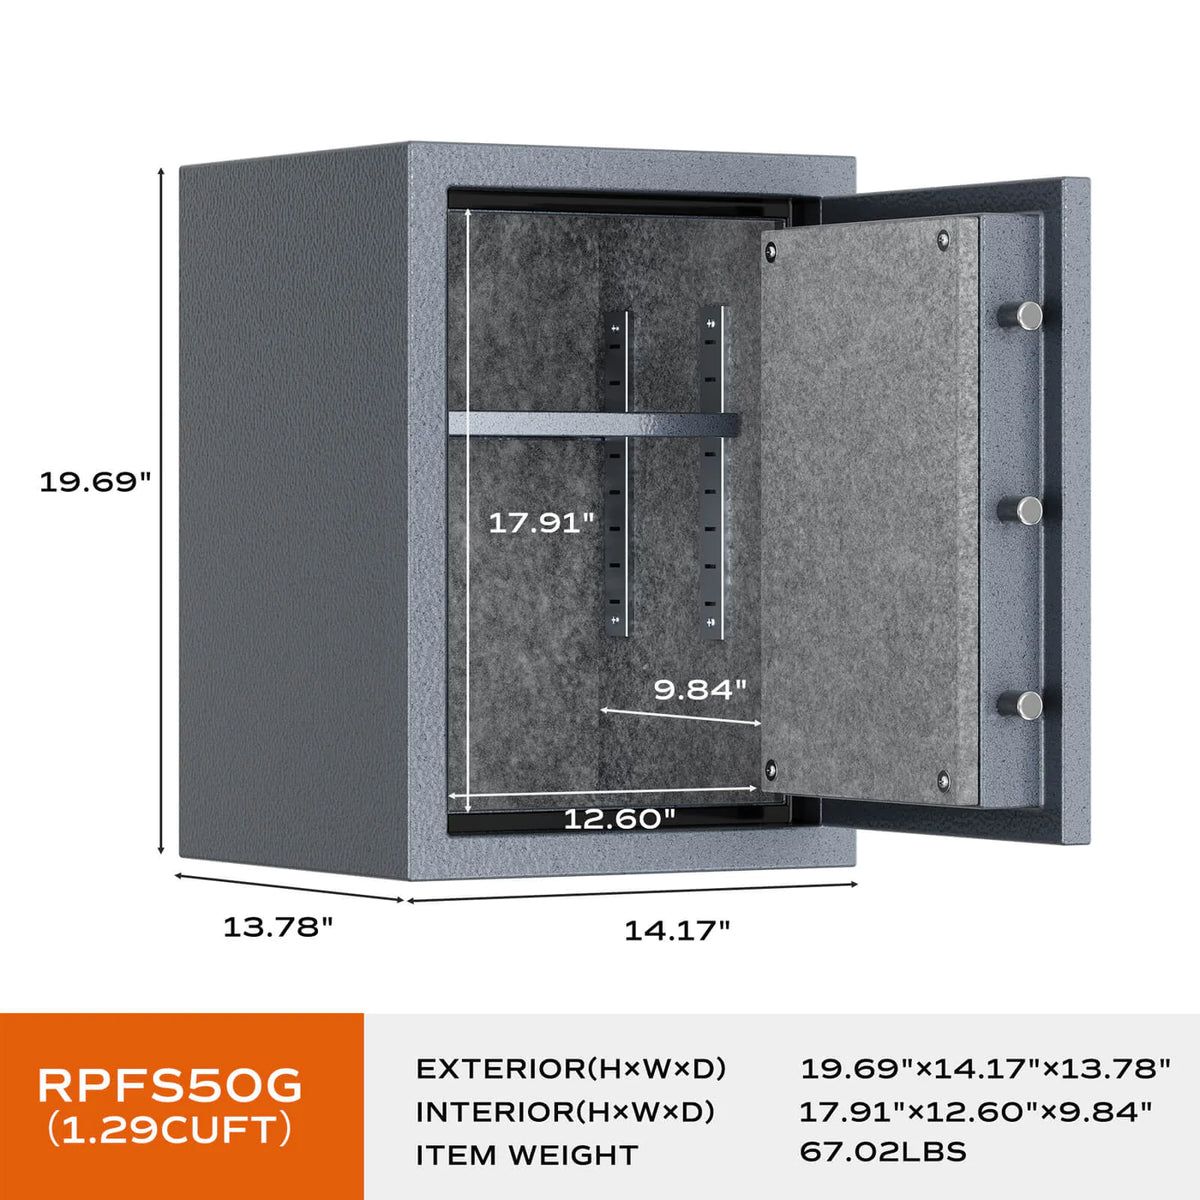 RPNB RPFS50G Grey High Capacity Biometric Fireproof Safe with Touch Screen Keypad Specificatons